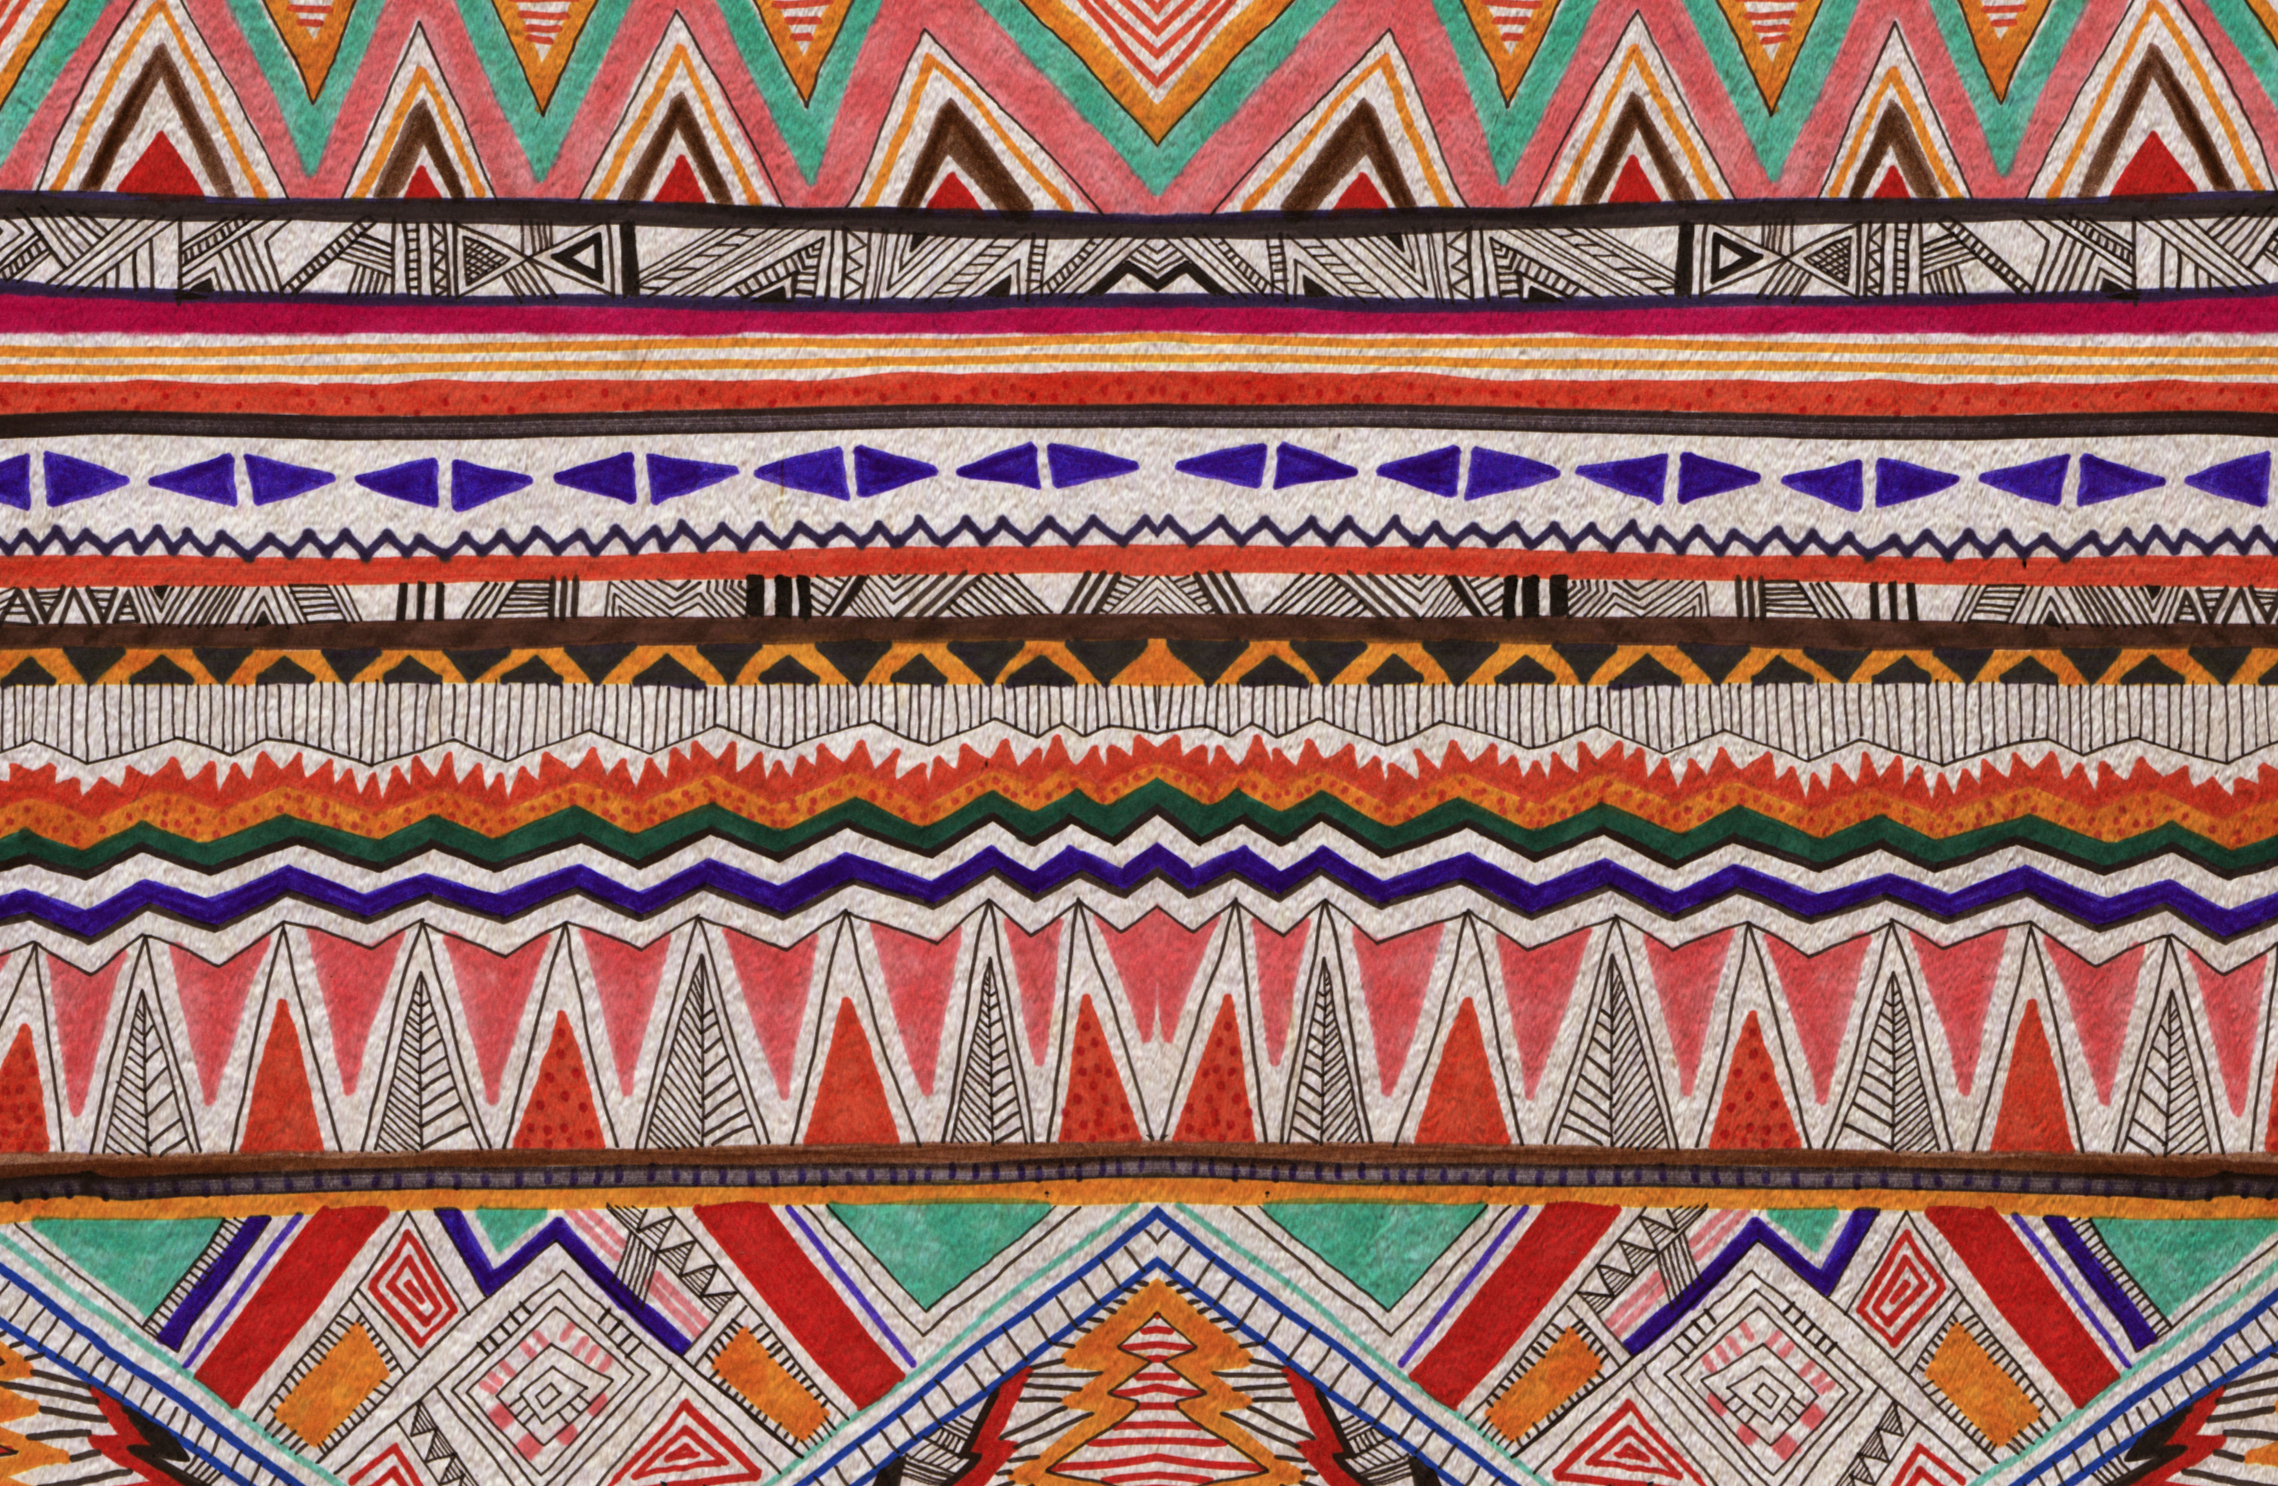 Tribal Hipster Wallpaper iPhone Background